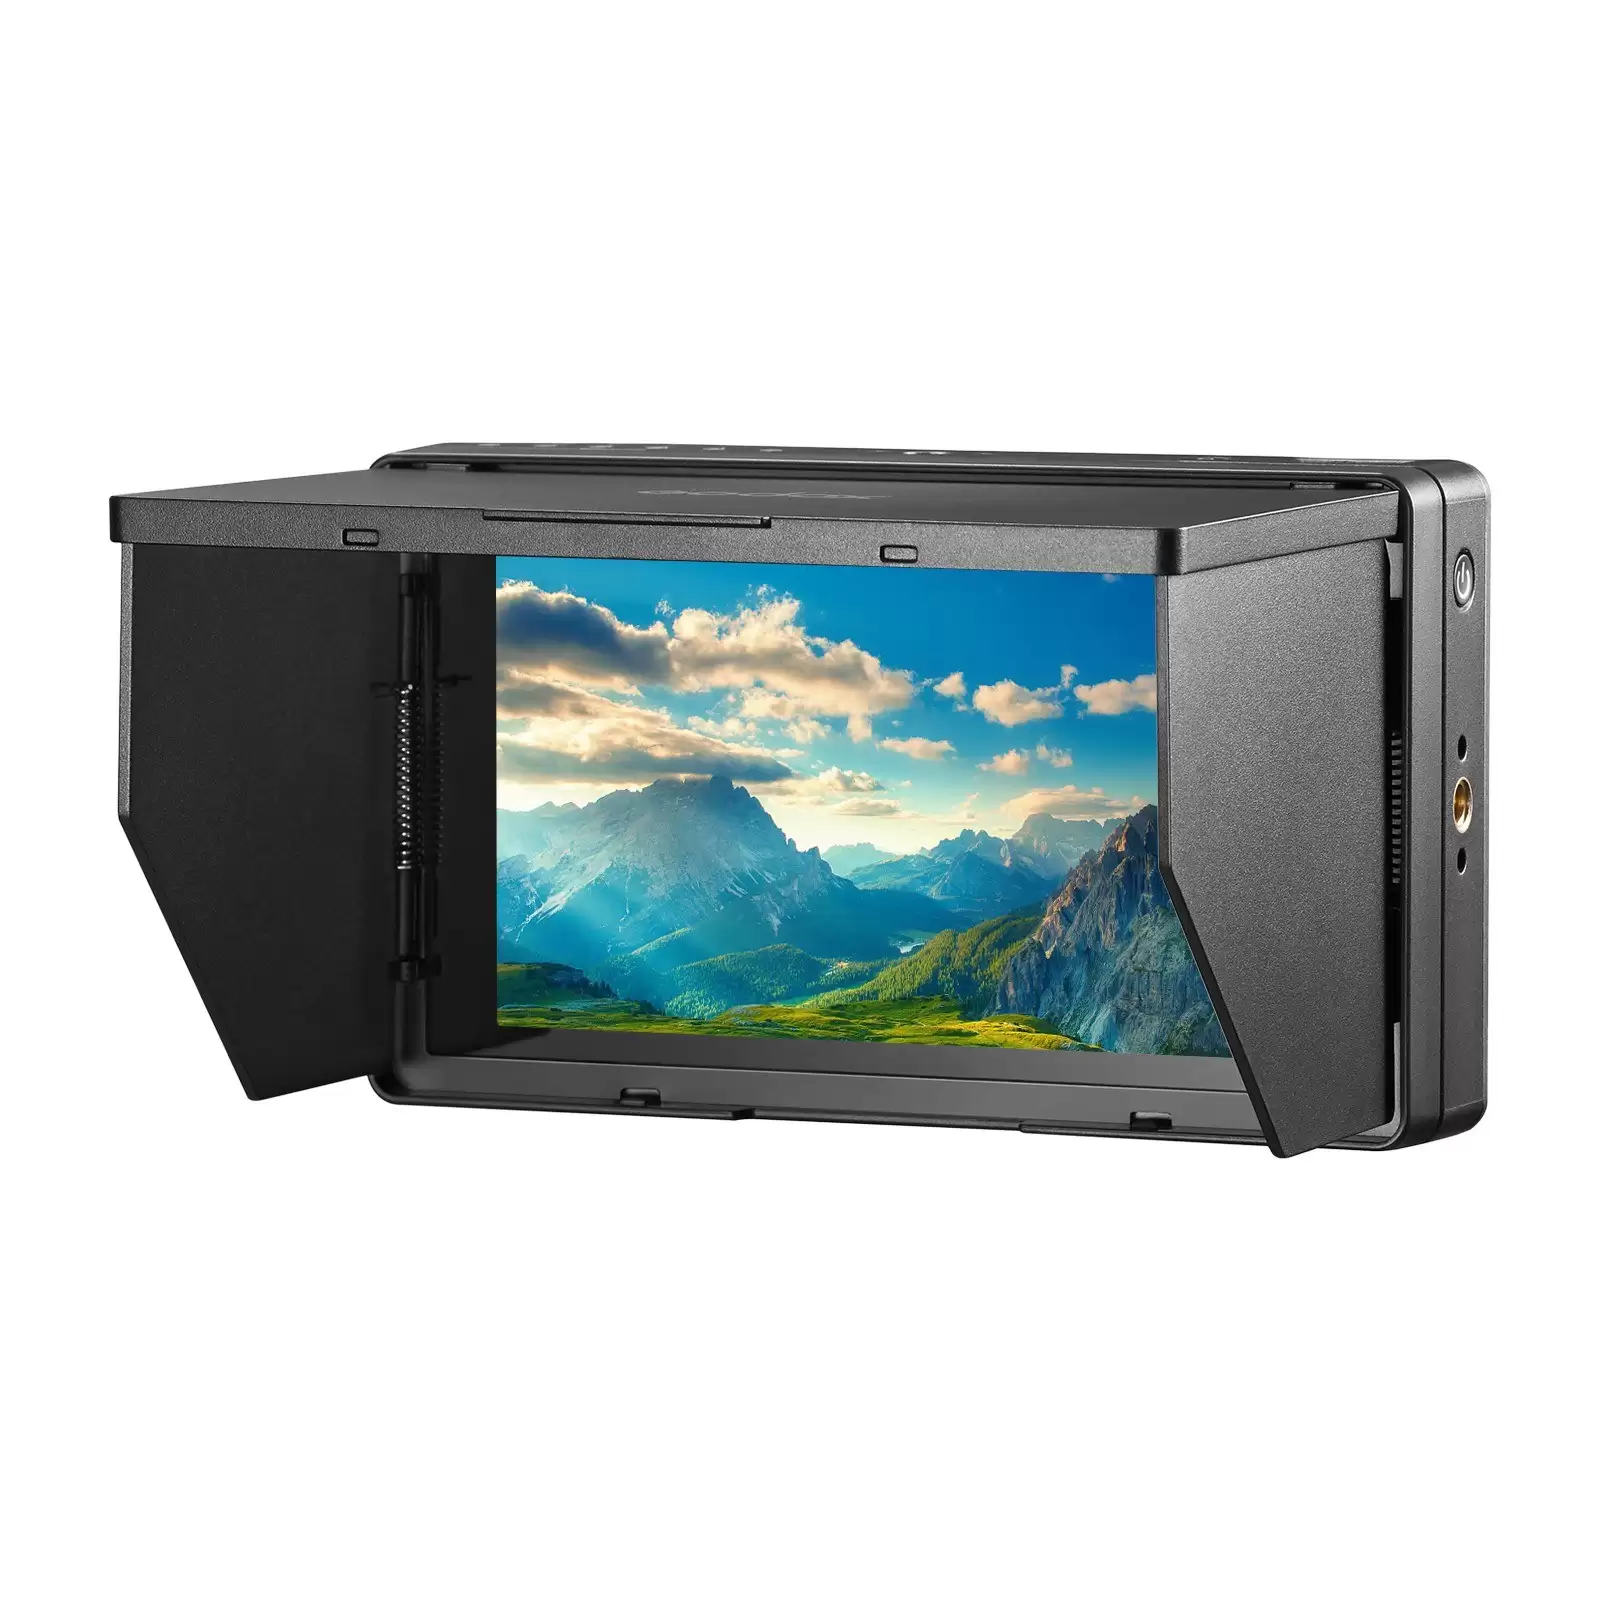 Get Extra 50% Discount On Godox Gm55 5.5 Inch Ips Touchscreen On-Camera Monitor, Limited Offers $159 With This Discount Coupon At Tomtop